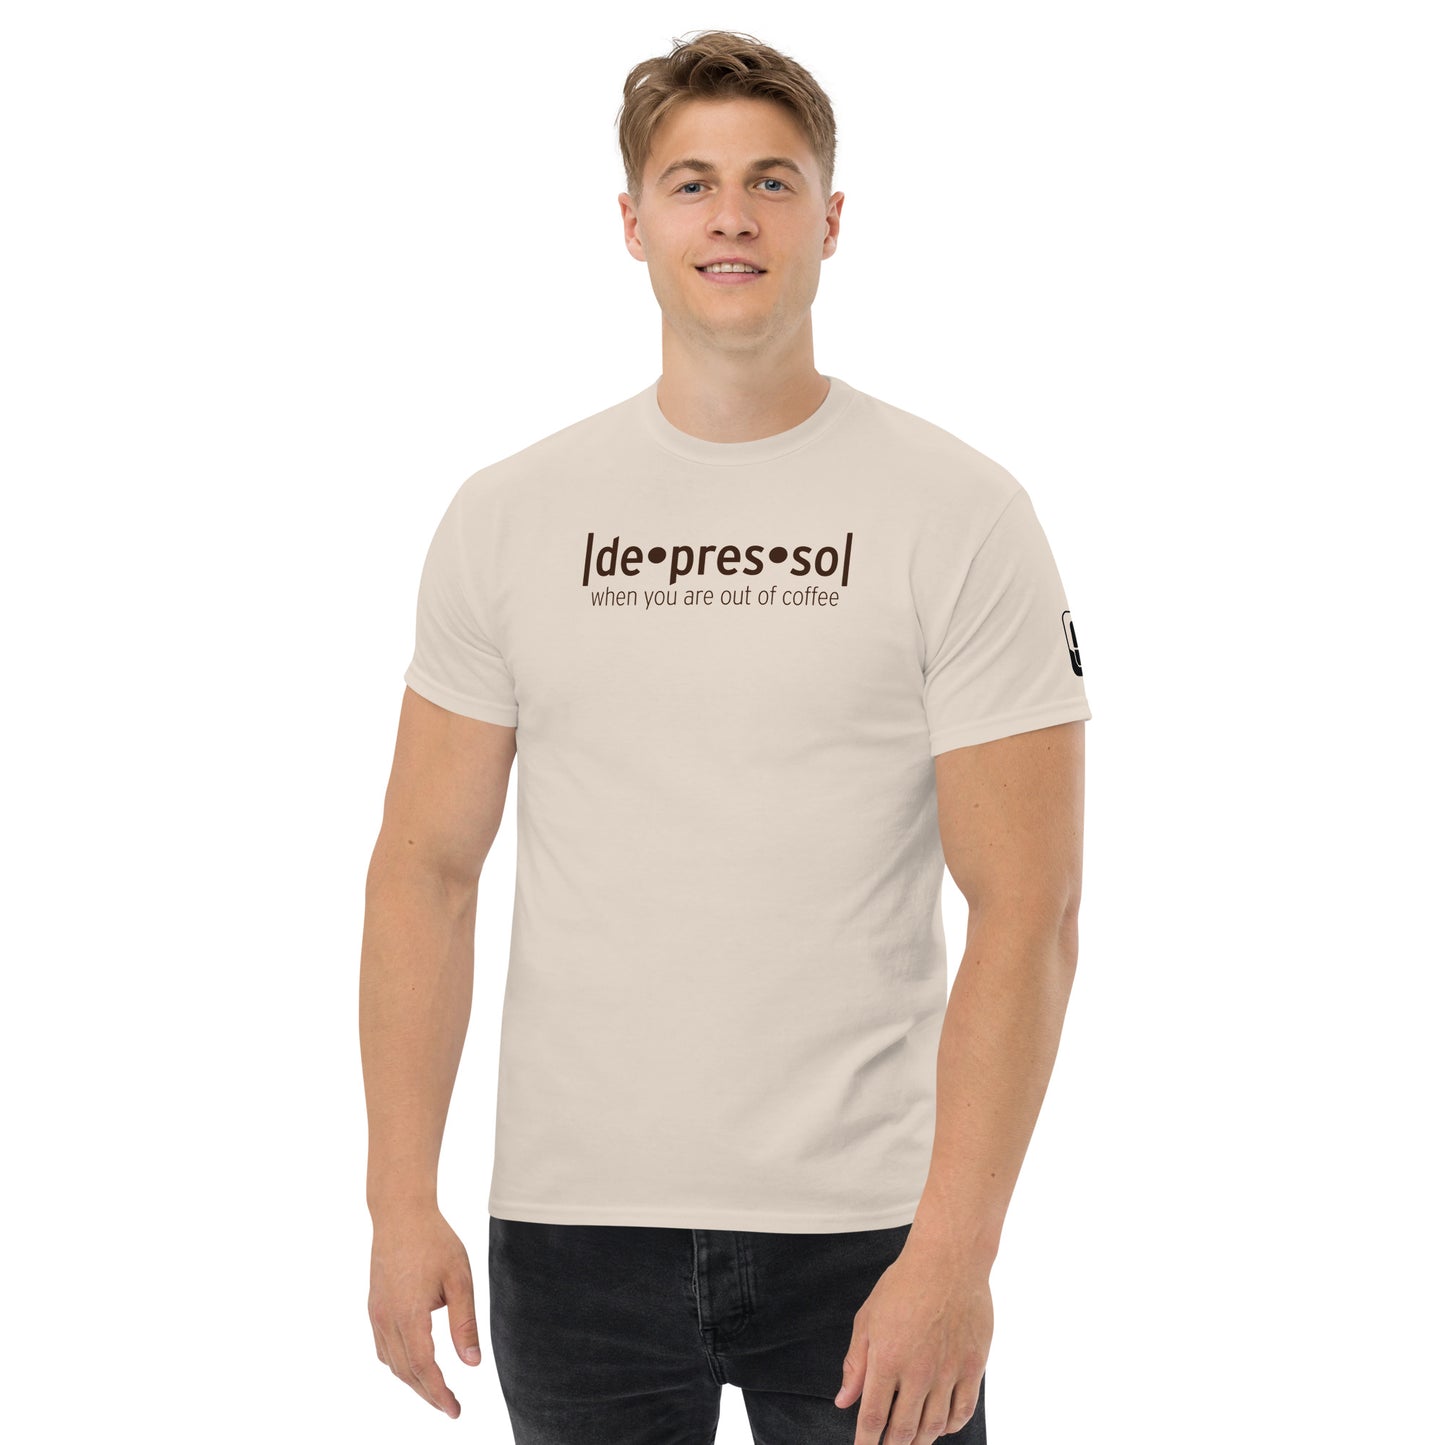 A young man with a friendly demeanor wearing a sand-colored t-shirt that humorously reads 'depresso' with the caption 'when you are out of coffee' underneath in a casual font, complete with a logo patch on the sleeve, against a white background.